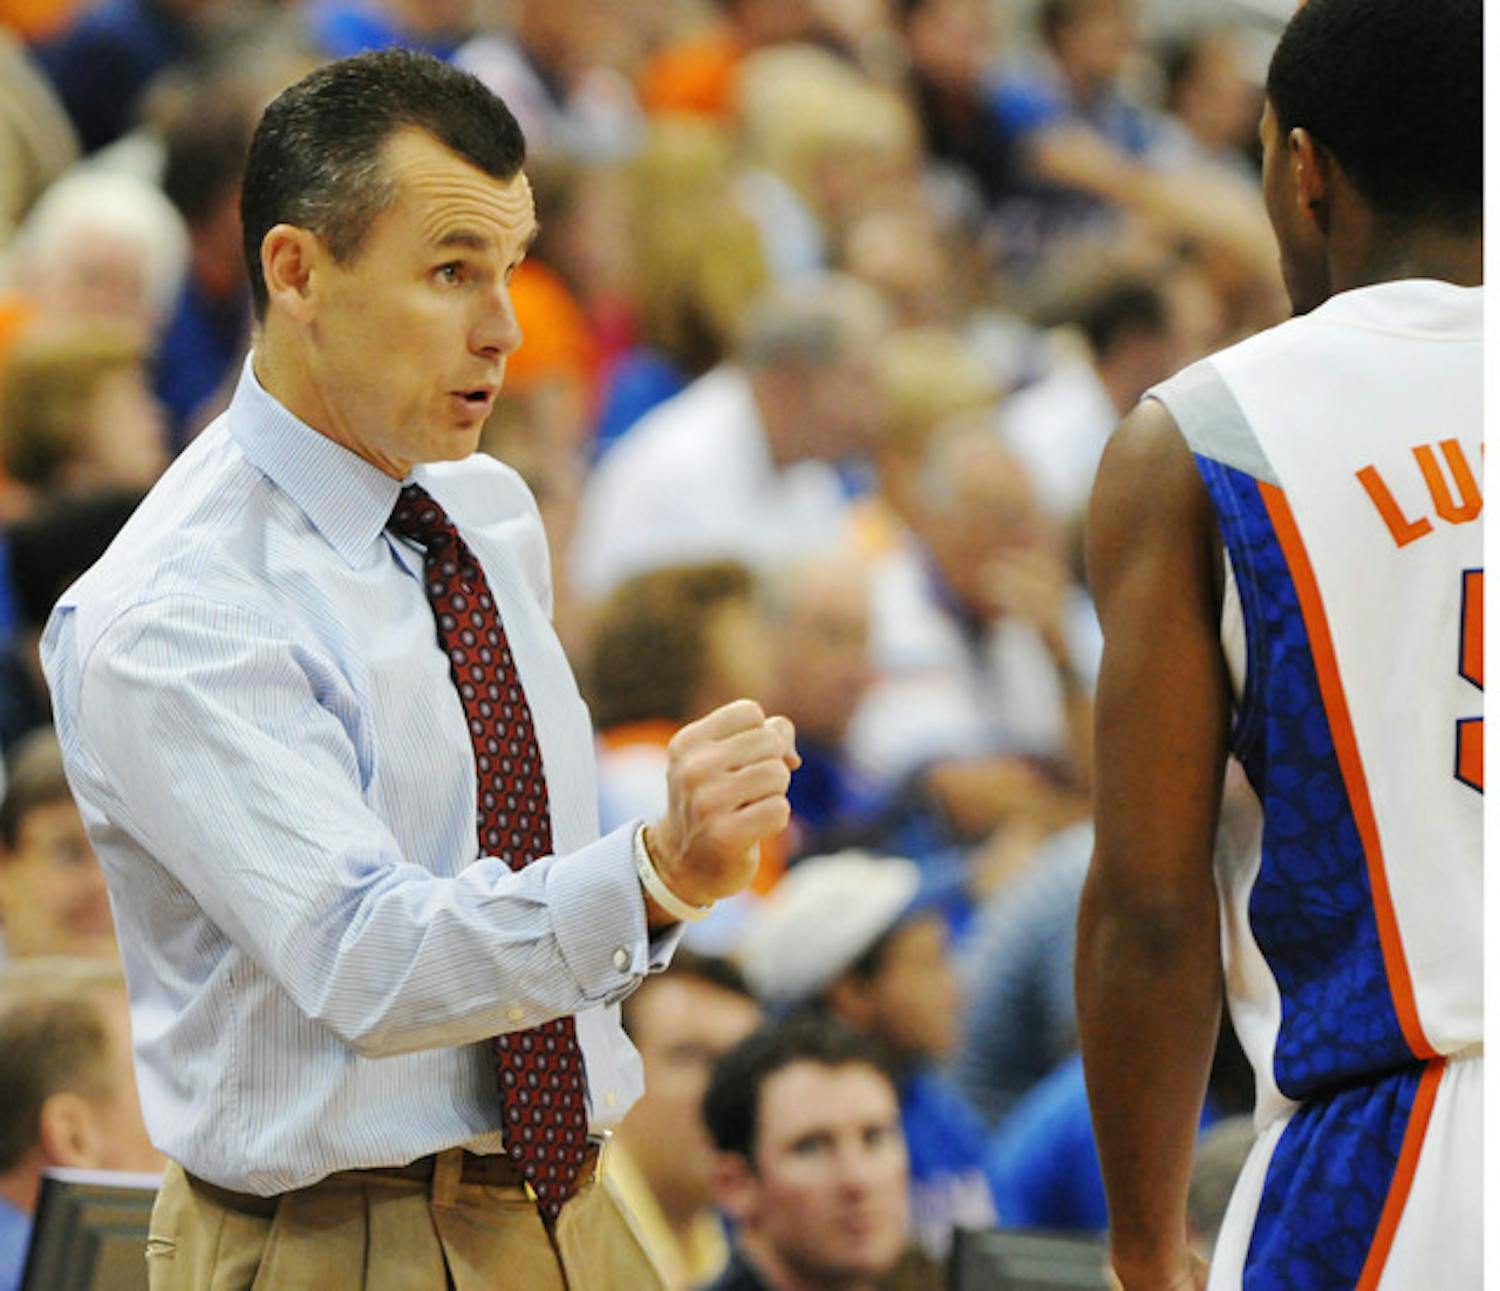 Florida coach Billy Donovan had to talk to his son before confirming an exhibition between UF and his school, Catholic University.